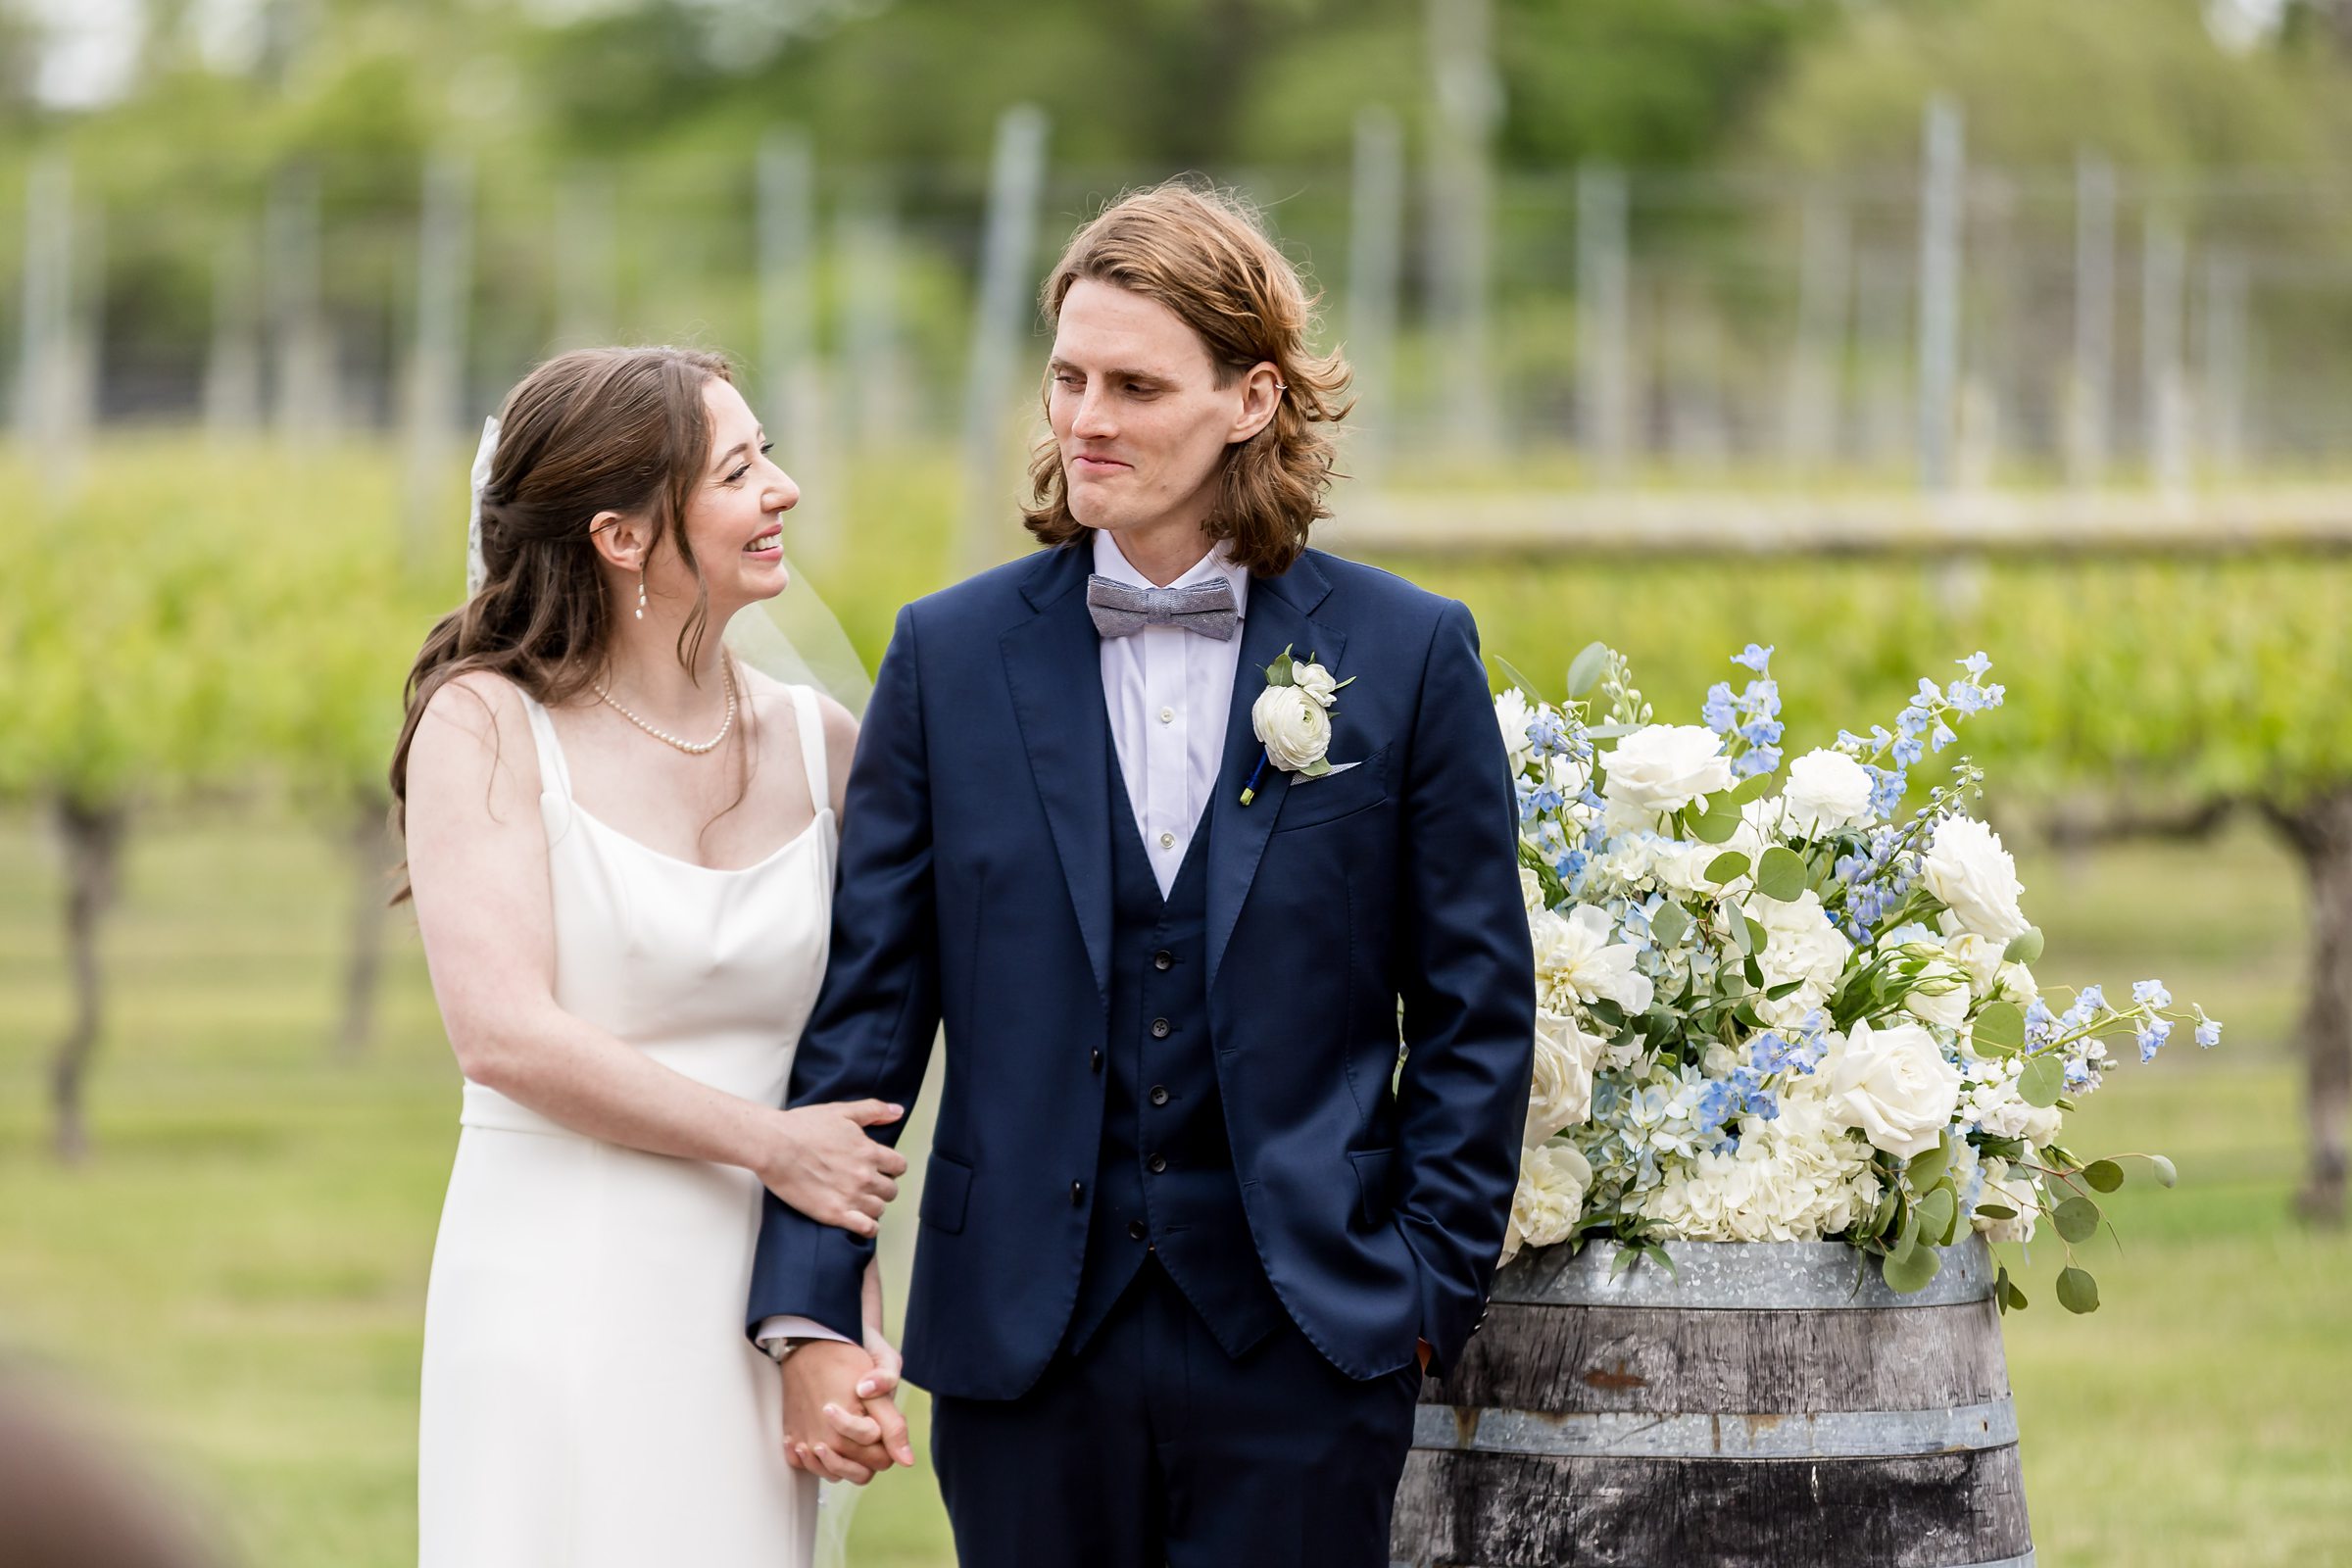 A bride in a white dress and a groom in a navy suit stand together holding hands outdoors, with greenery in the background. The bride smiles at the groom, who looks forward. There are white flowers beside them.